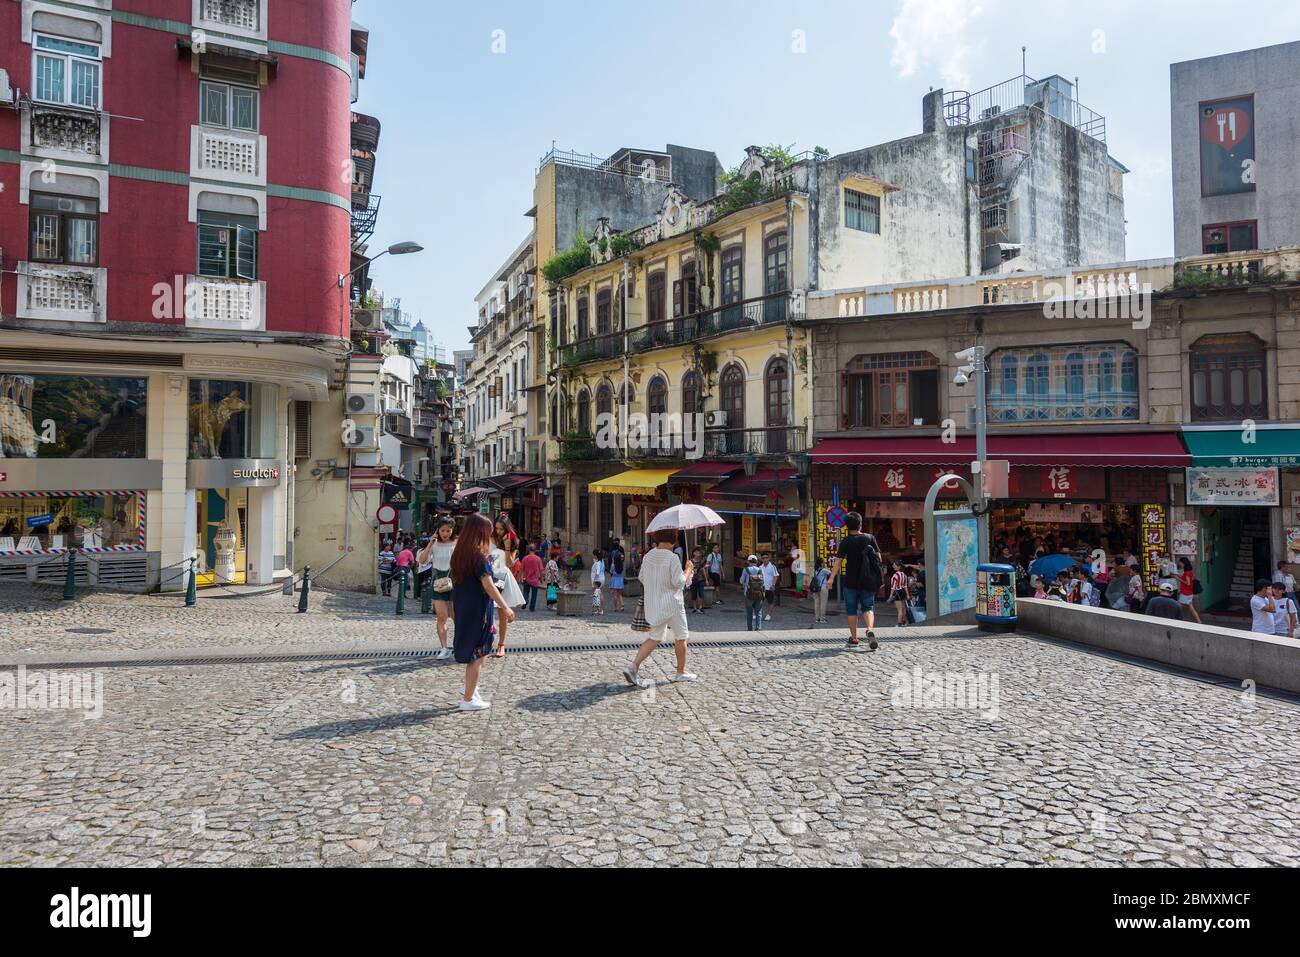 A morning view of a busy street with people shopping on city center in Macau, China. Stock Photo